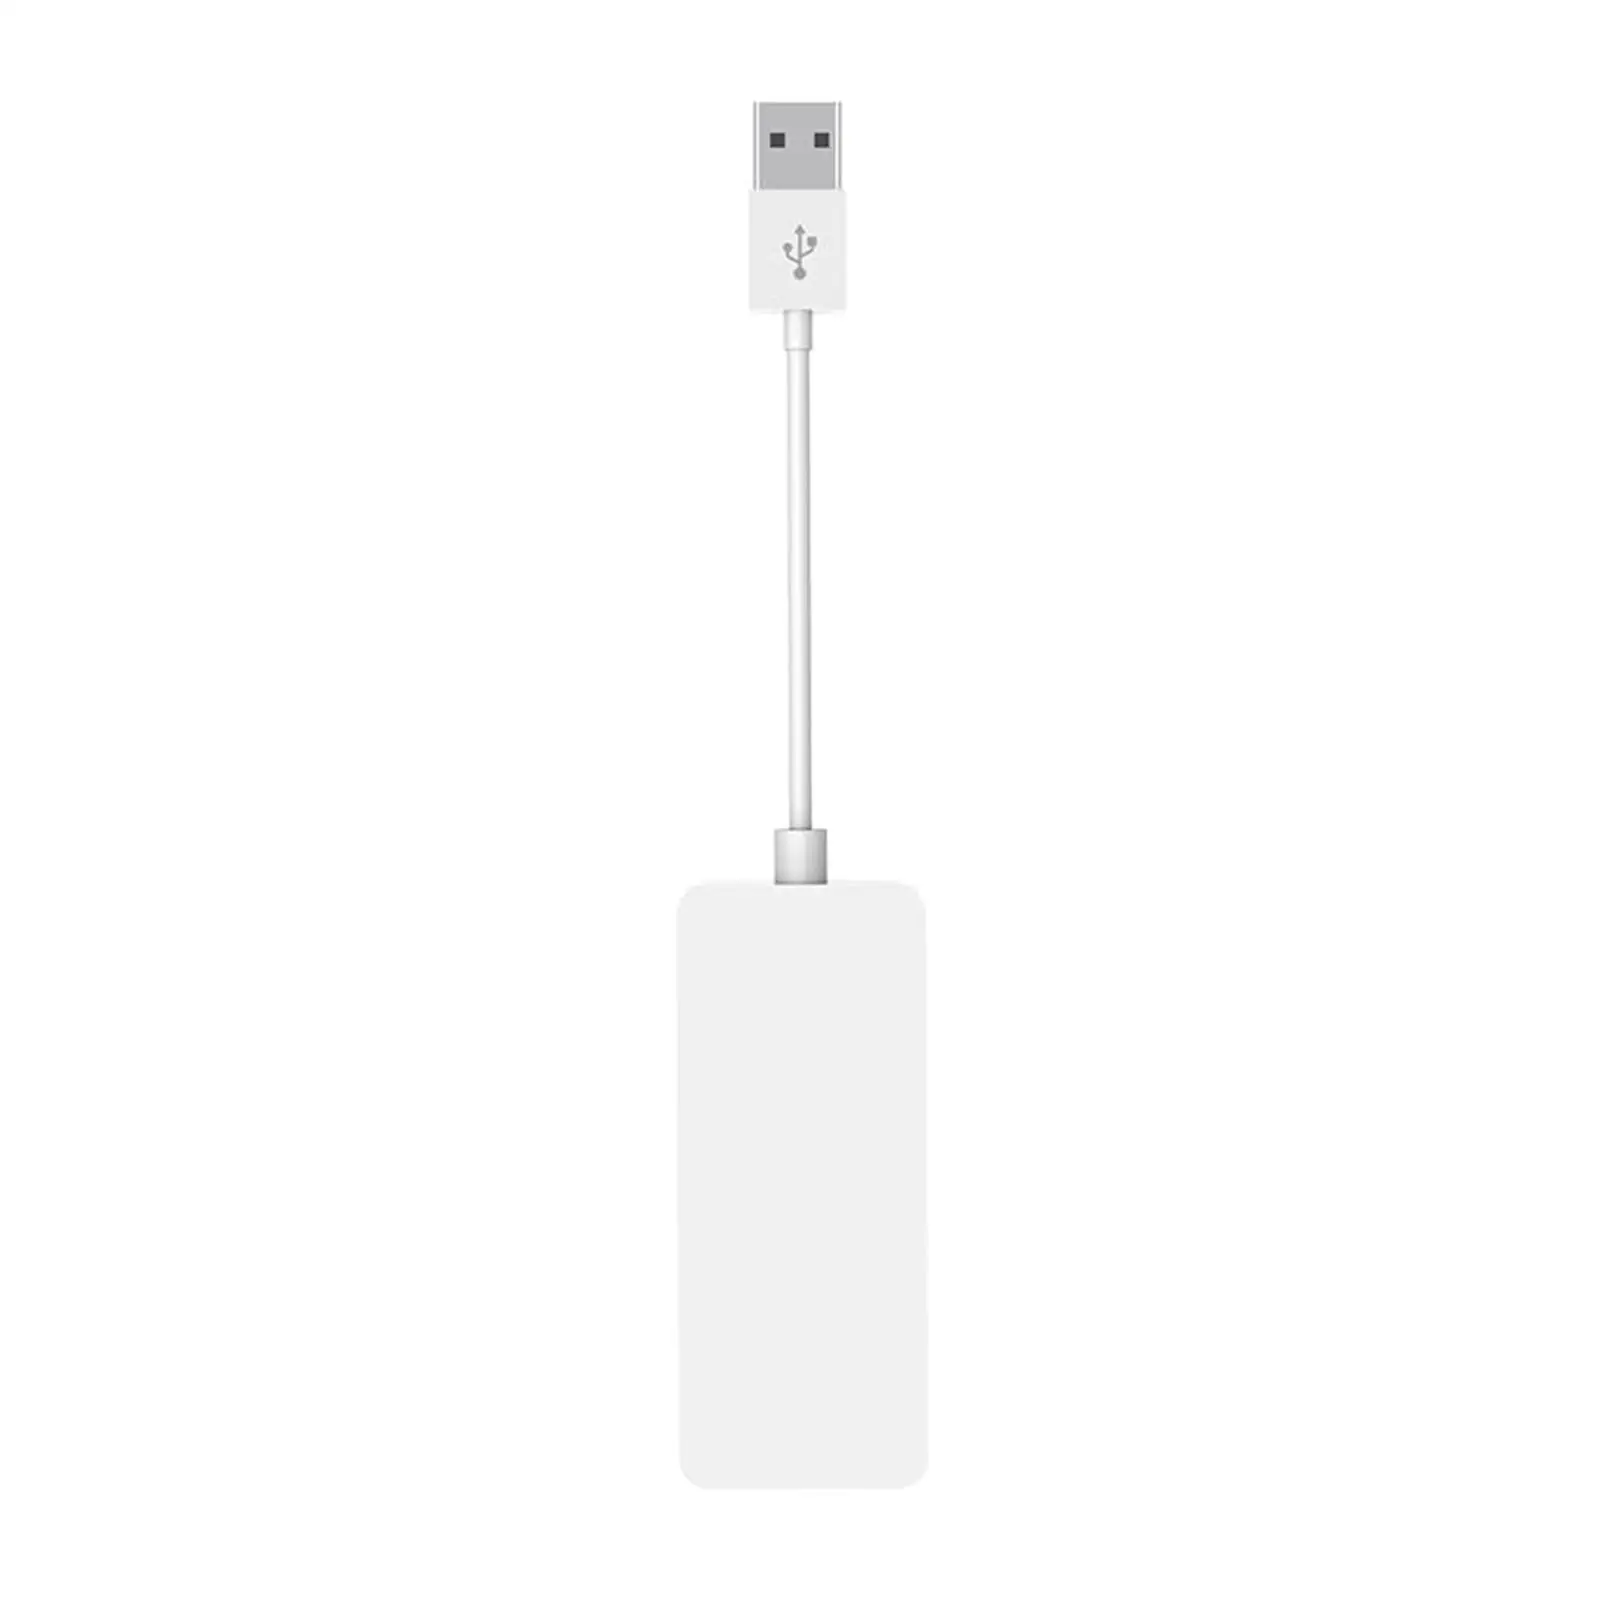 Wired  Auto  Smart Link USB Dongle for Android Navigation Player, White